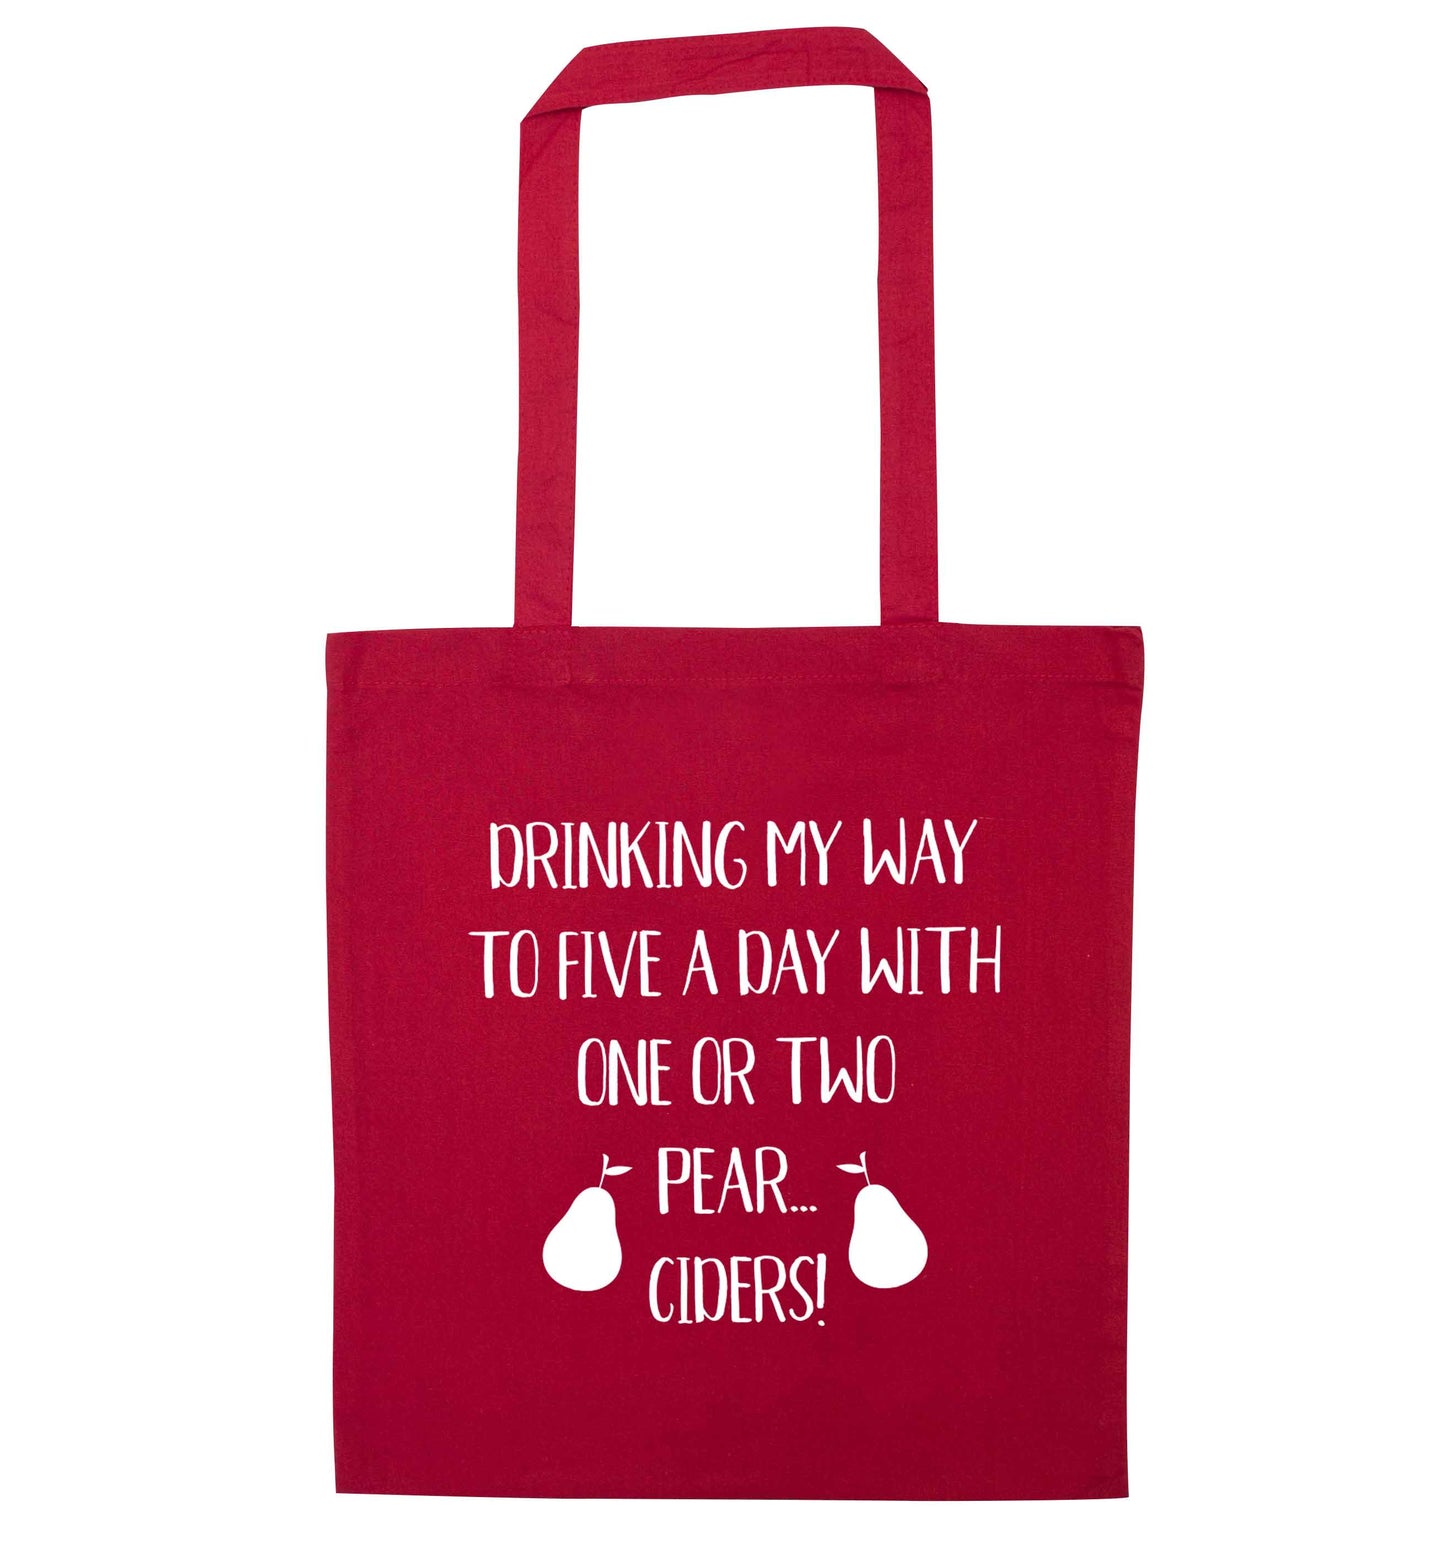 Drinking my way to five a day with one or two strawberry ciders red tote bag